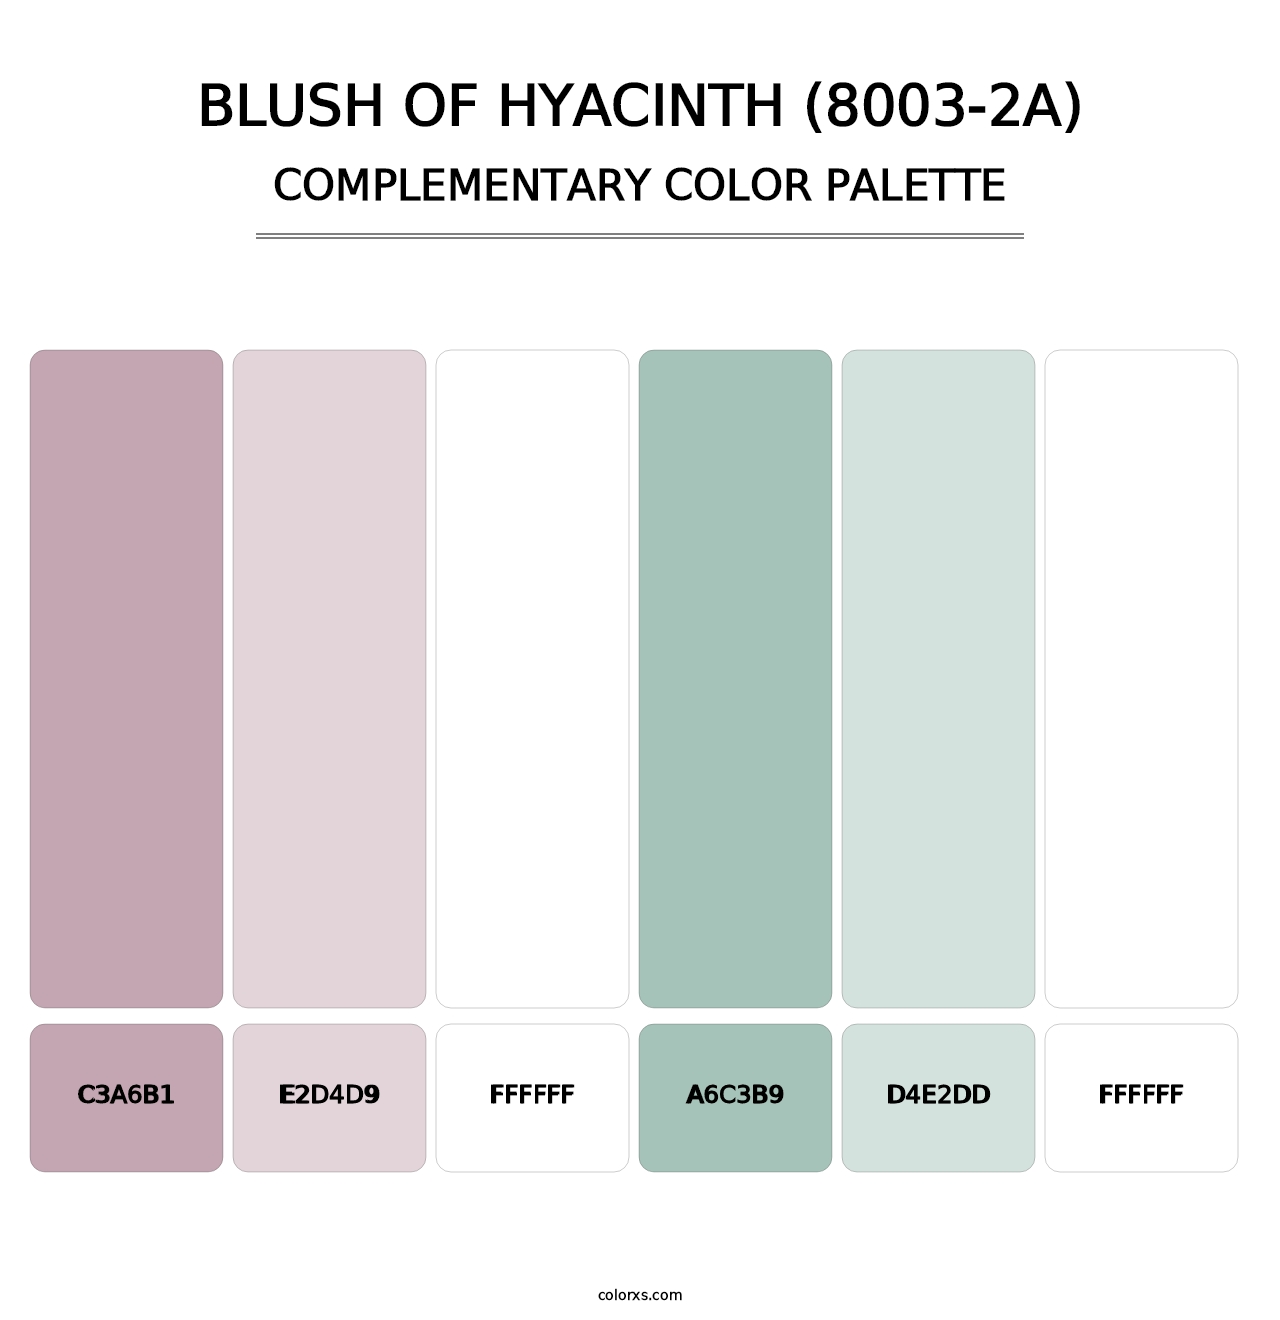 Blush of Hyacinth (8003-2A) - Complementary Color Palette